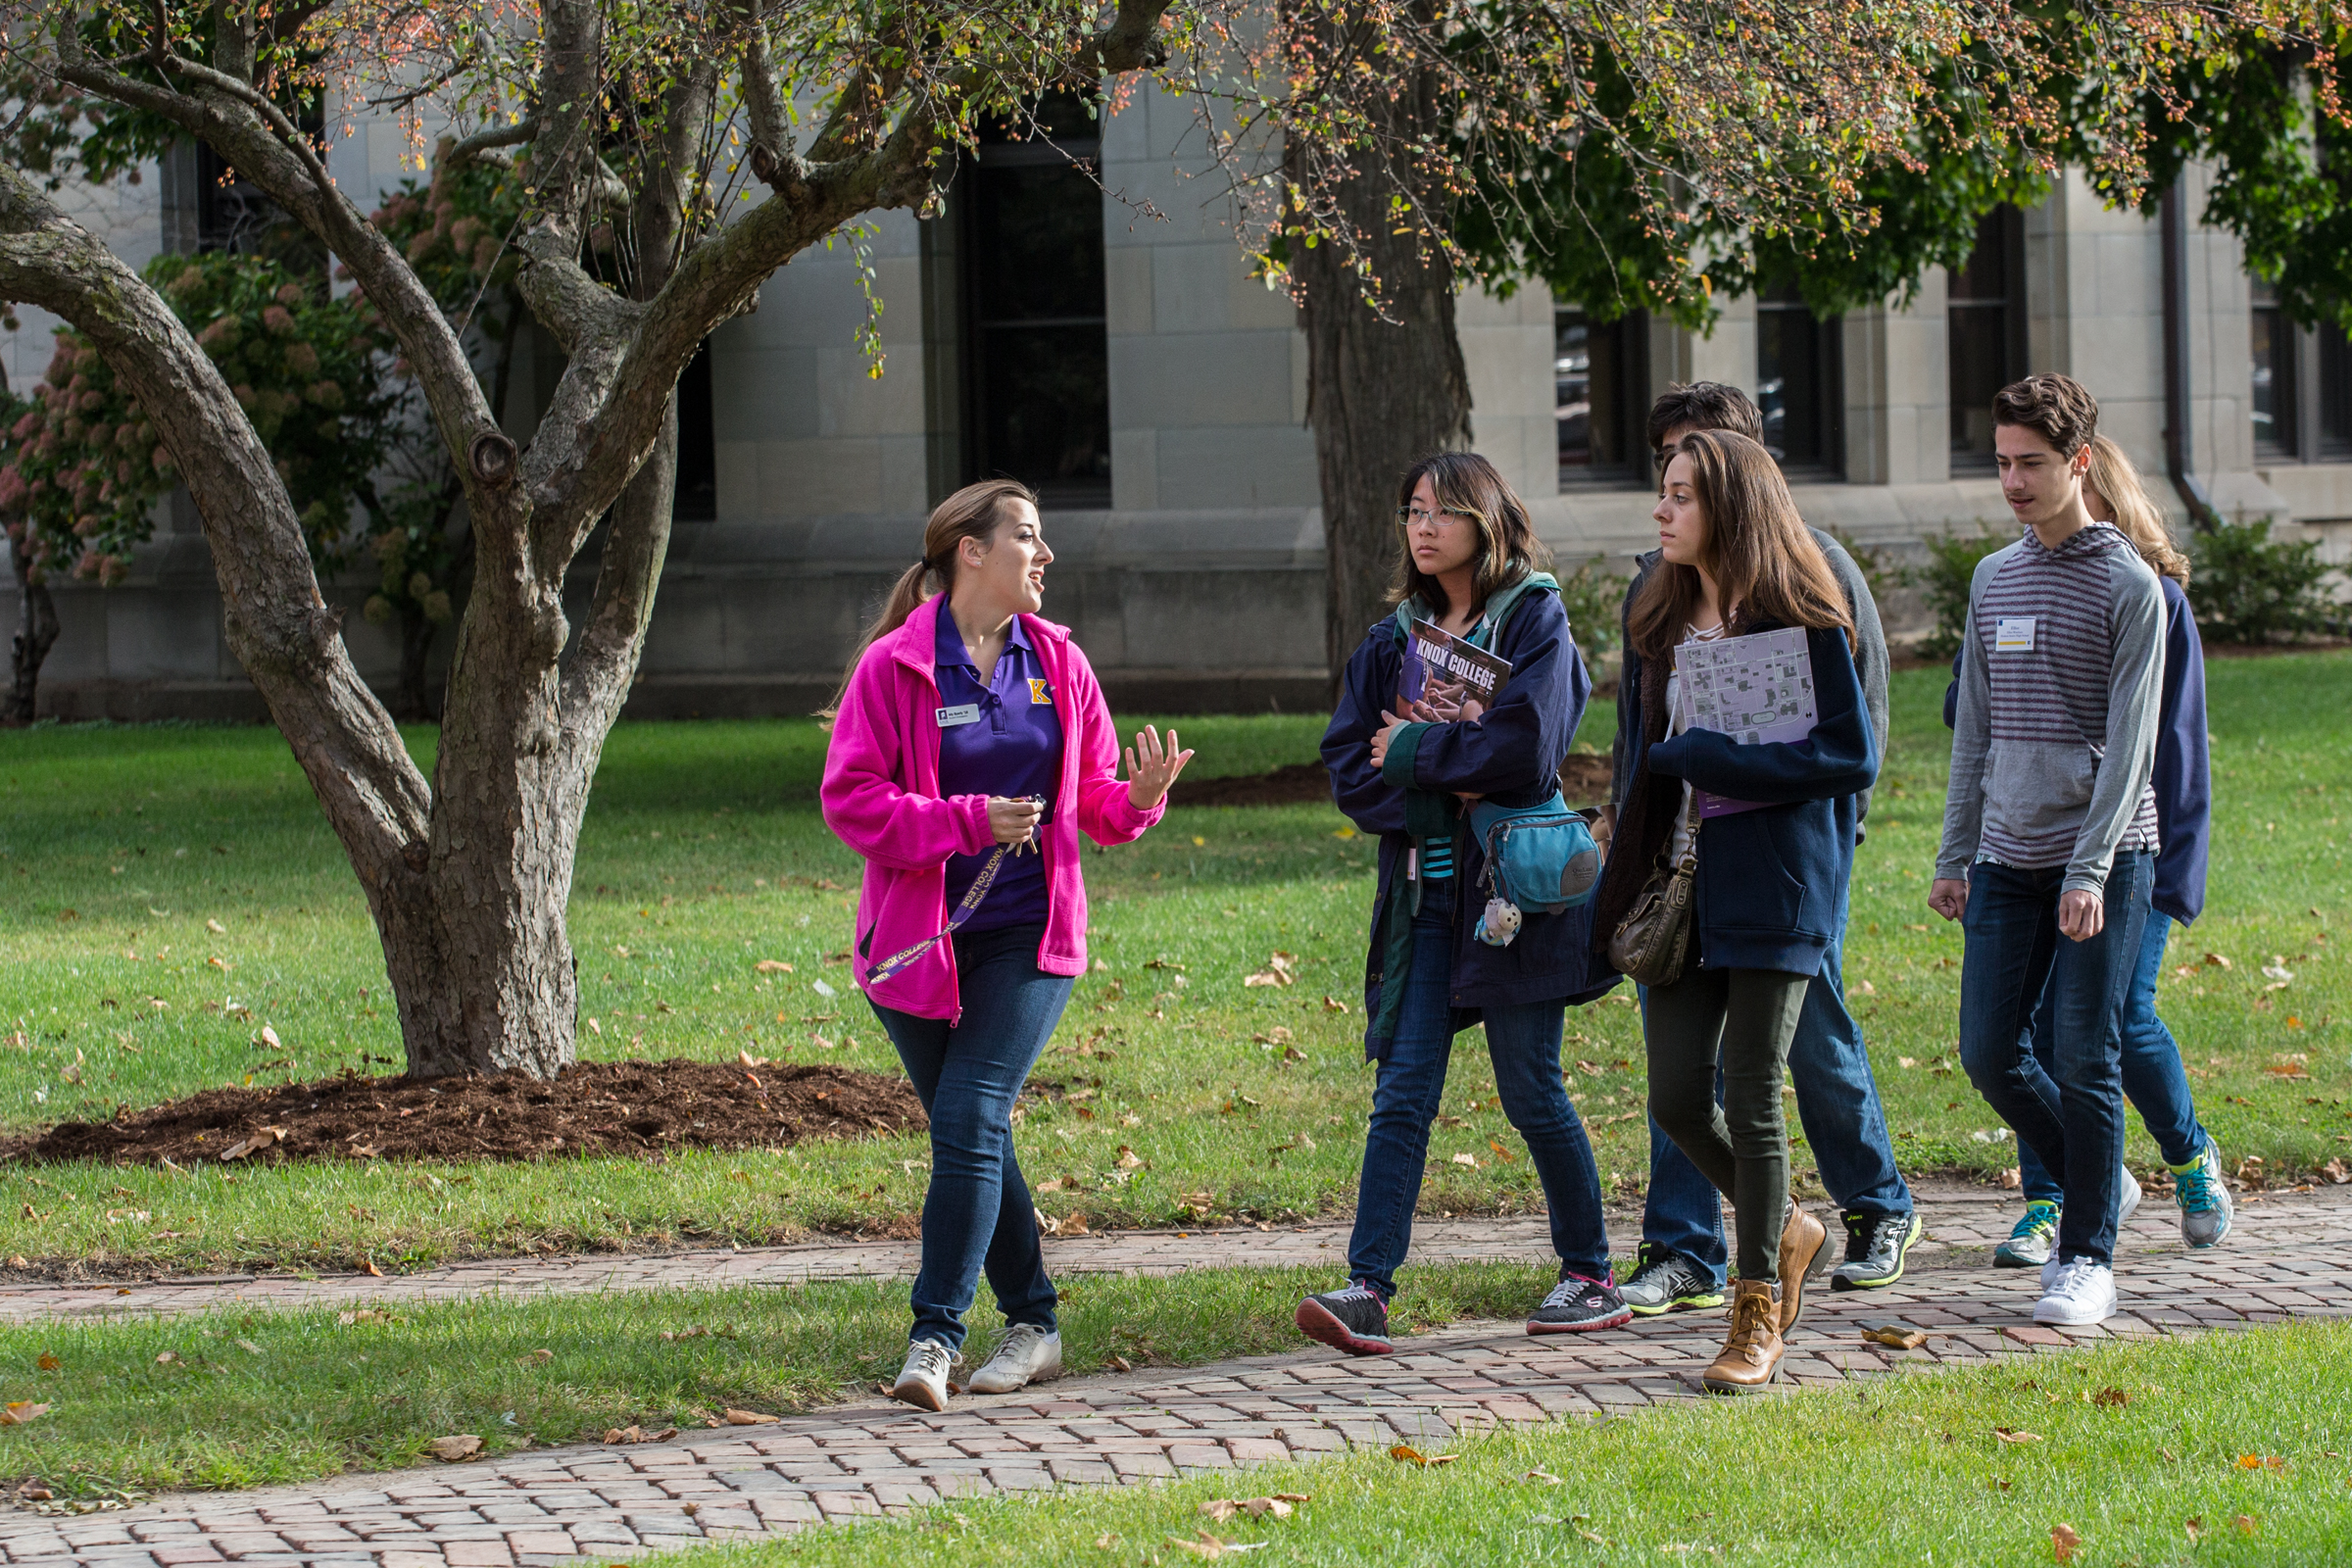 A tour guide leads a group of visitors down the sidewalk on the Knox College campus.